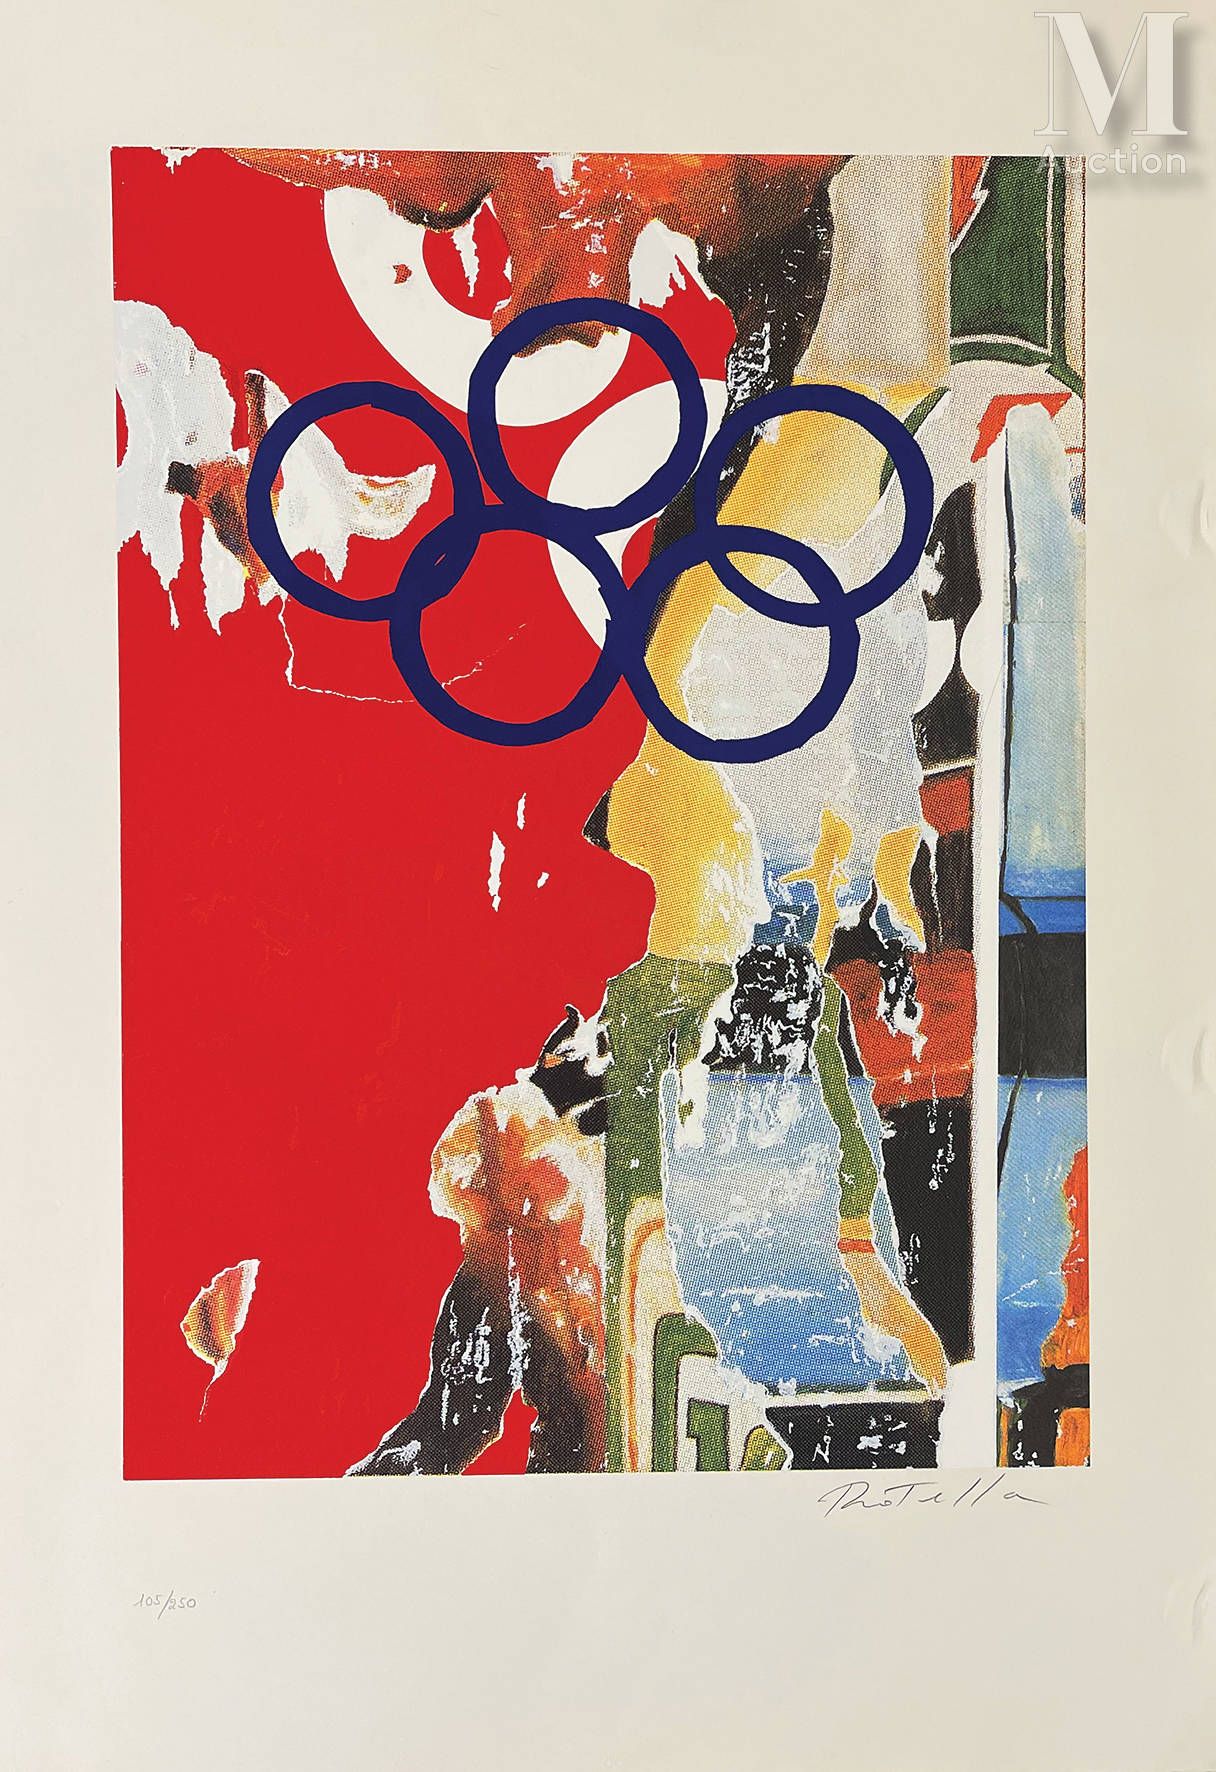 ROTELLA MIMO Olympic Games print signed and numbered 105/250 Mimo Rotella



aro&hellip;